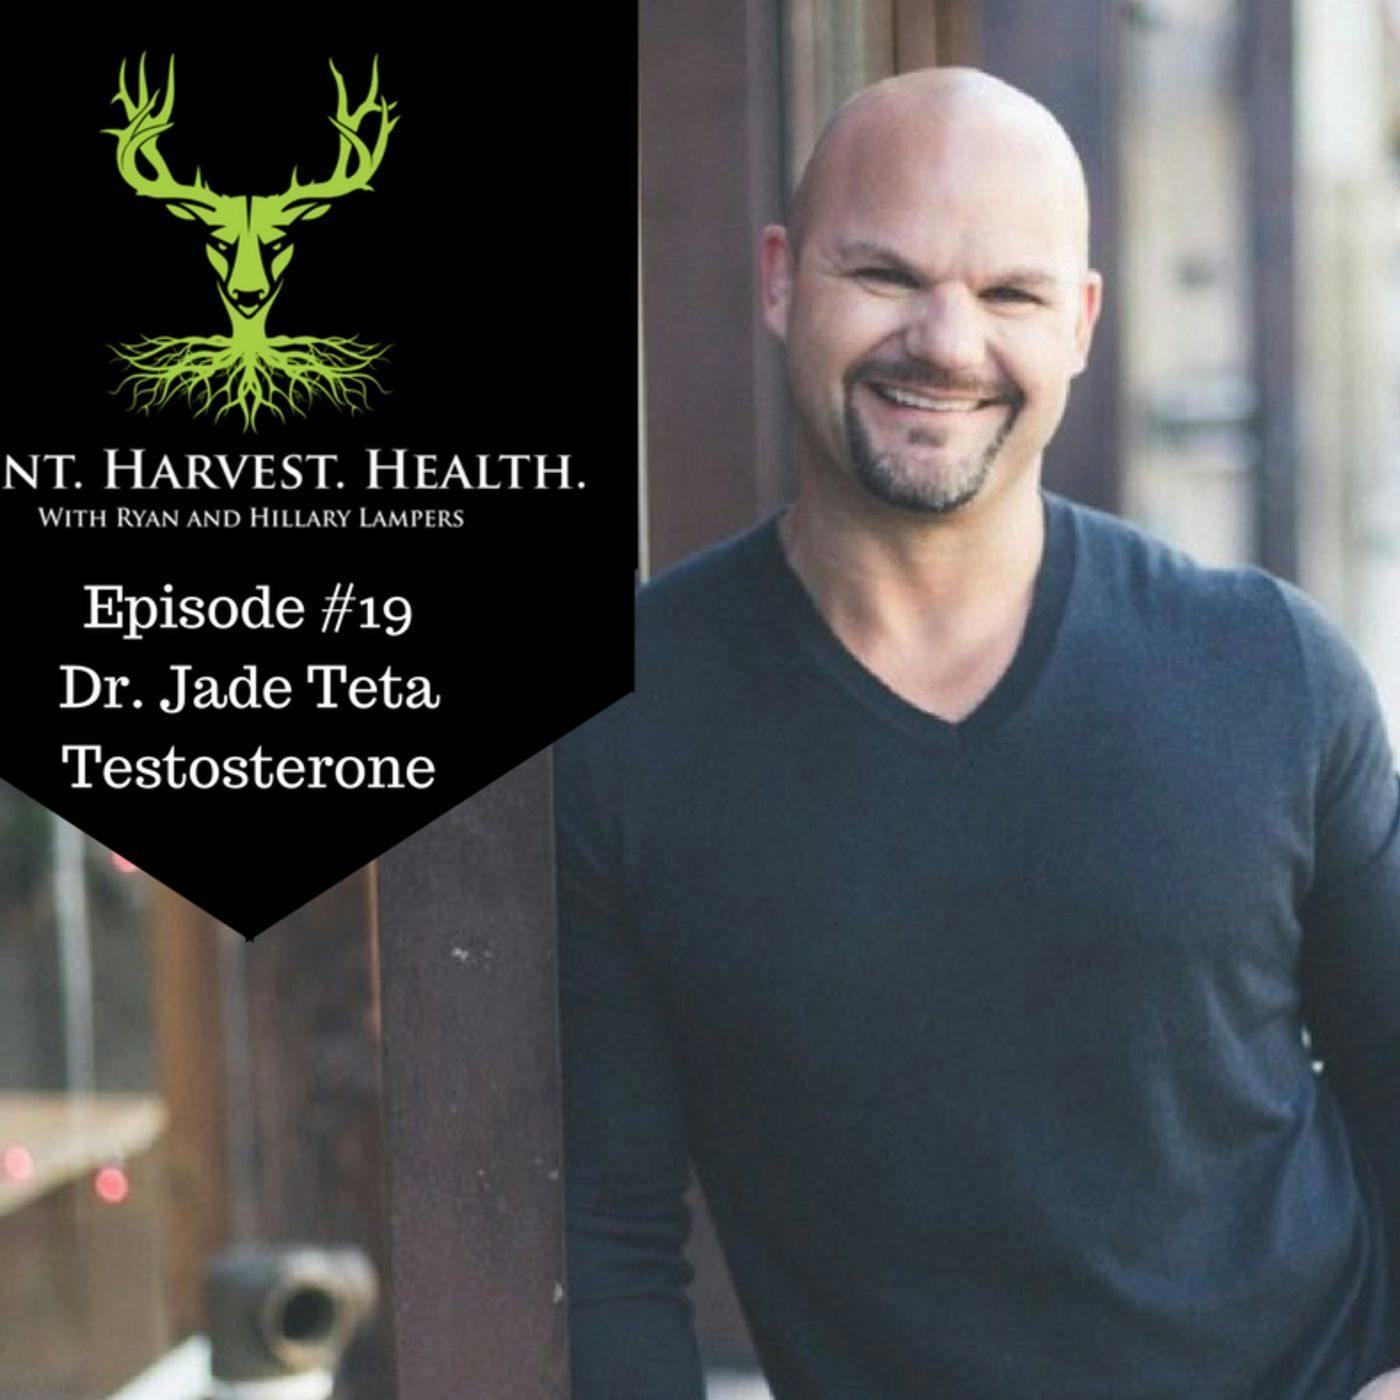 Episode #19:  Mind, Muscle, and Metabolism, Testosterone, and All Things Man with Dr. Jade Teta